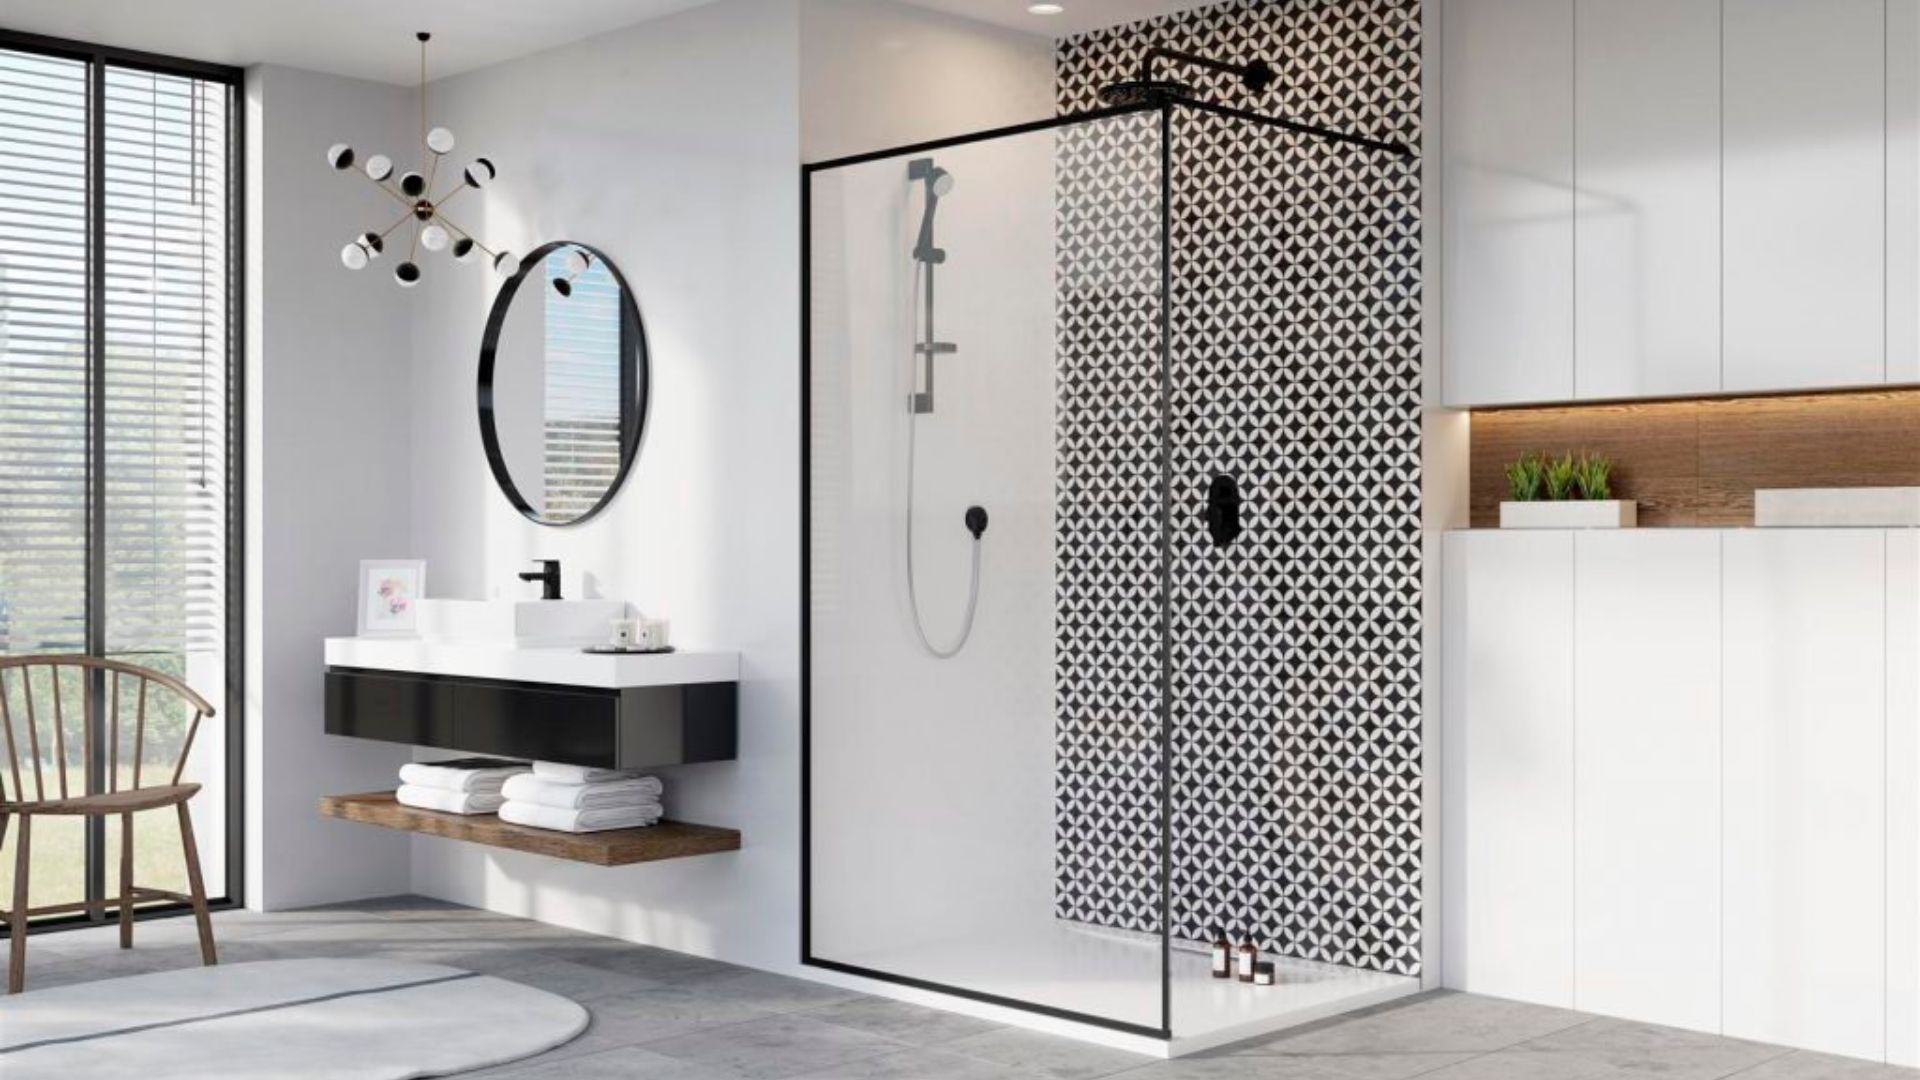 The Personal Touch of Tailored Shower Enclosures